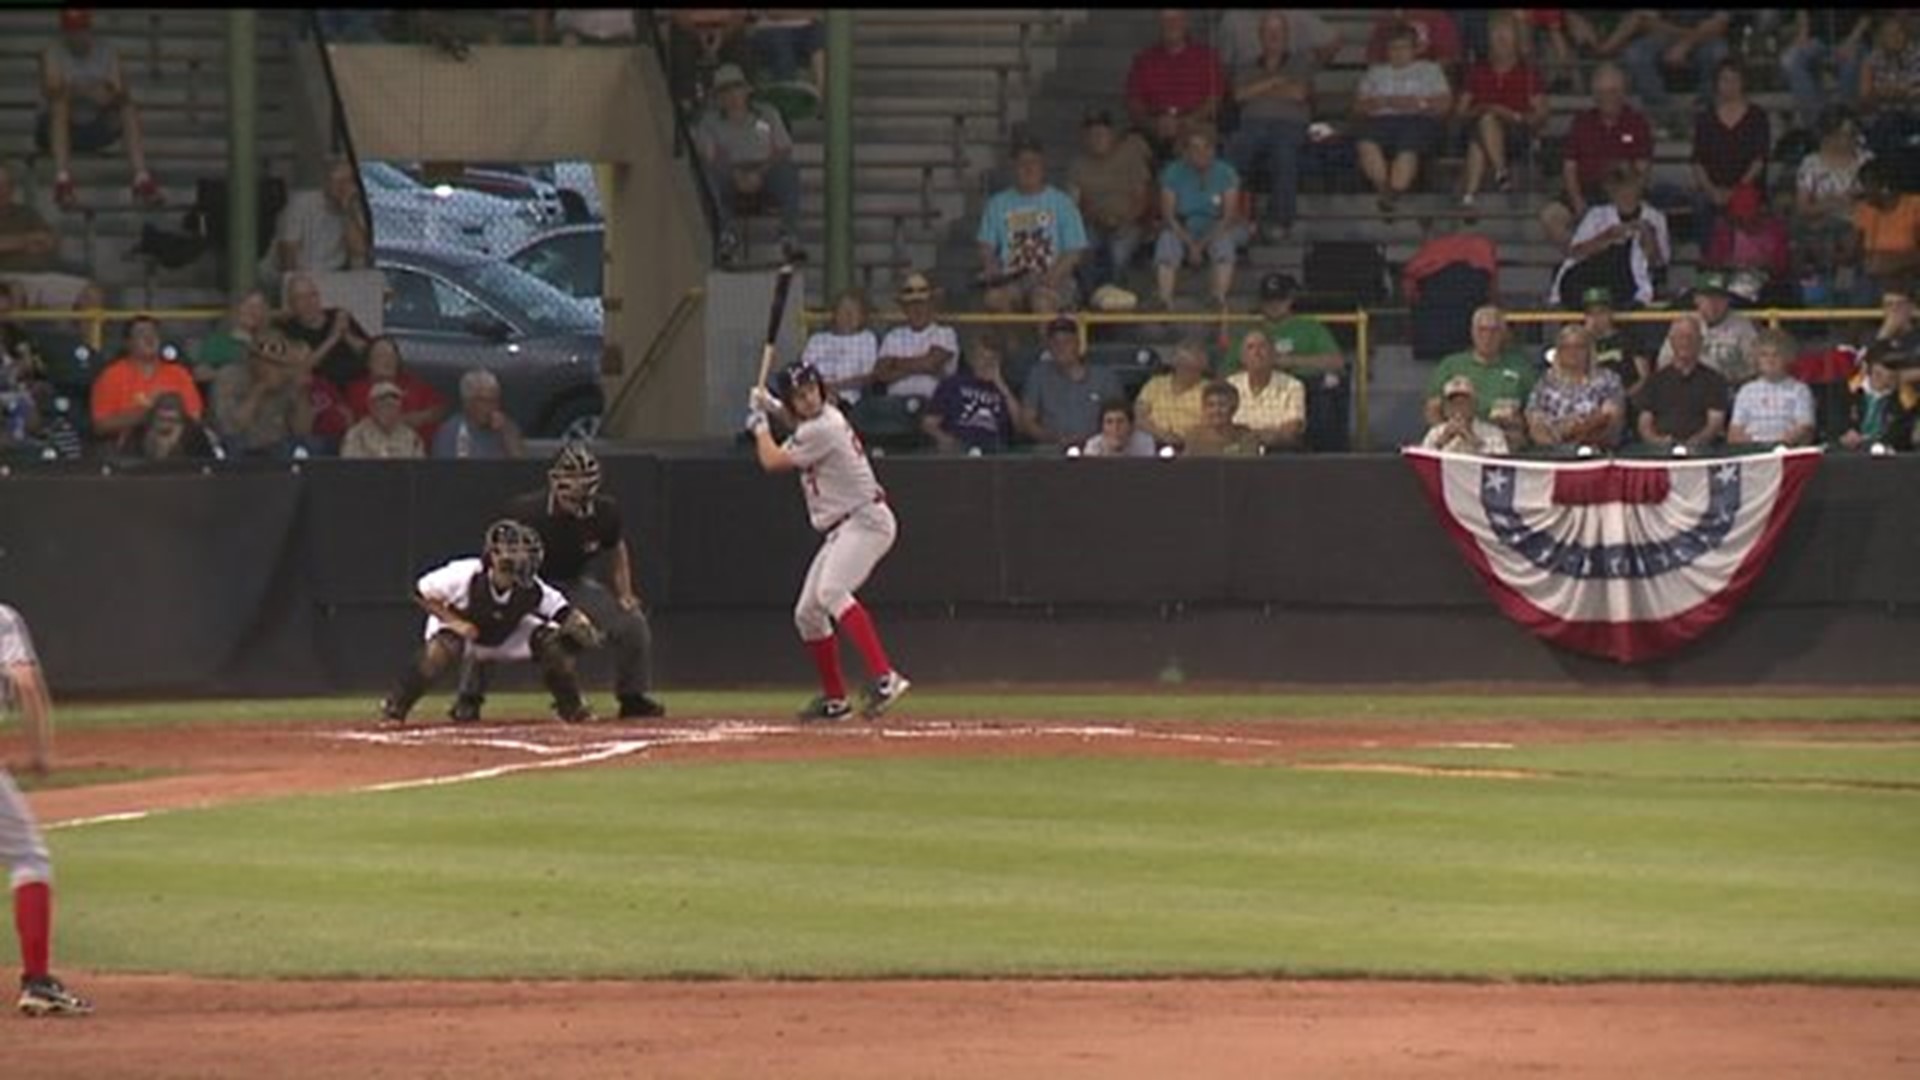 Great Lakes blanks Clinton in Game 2